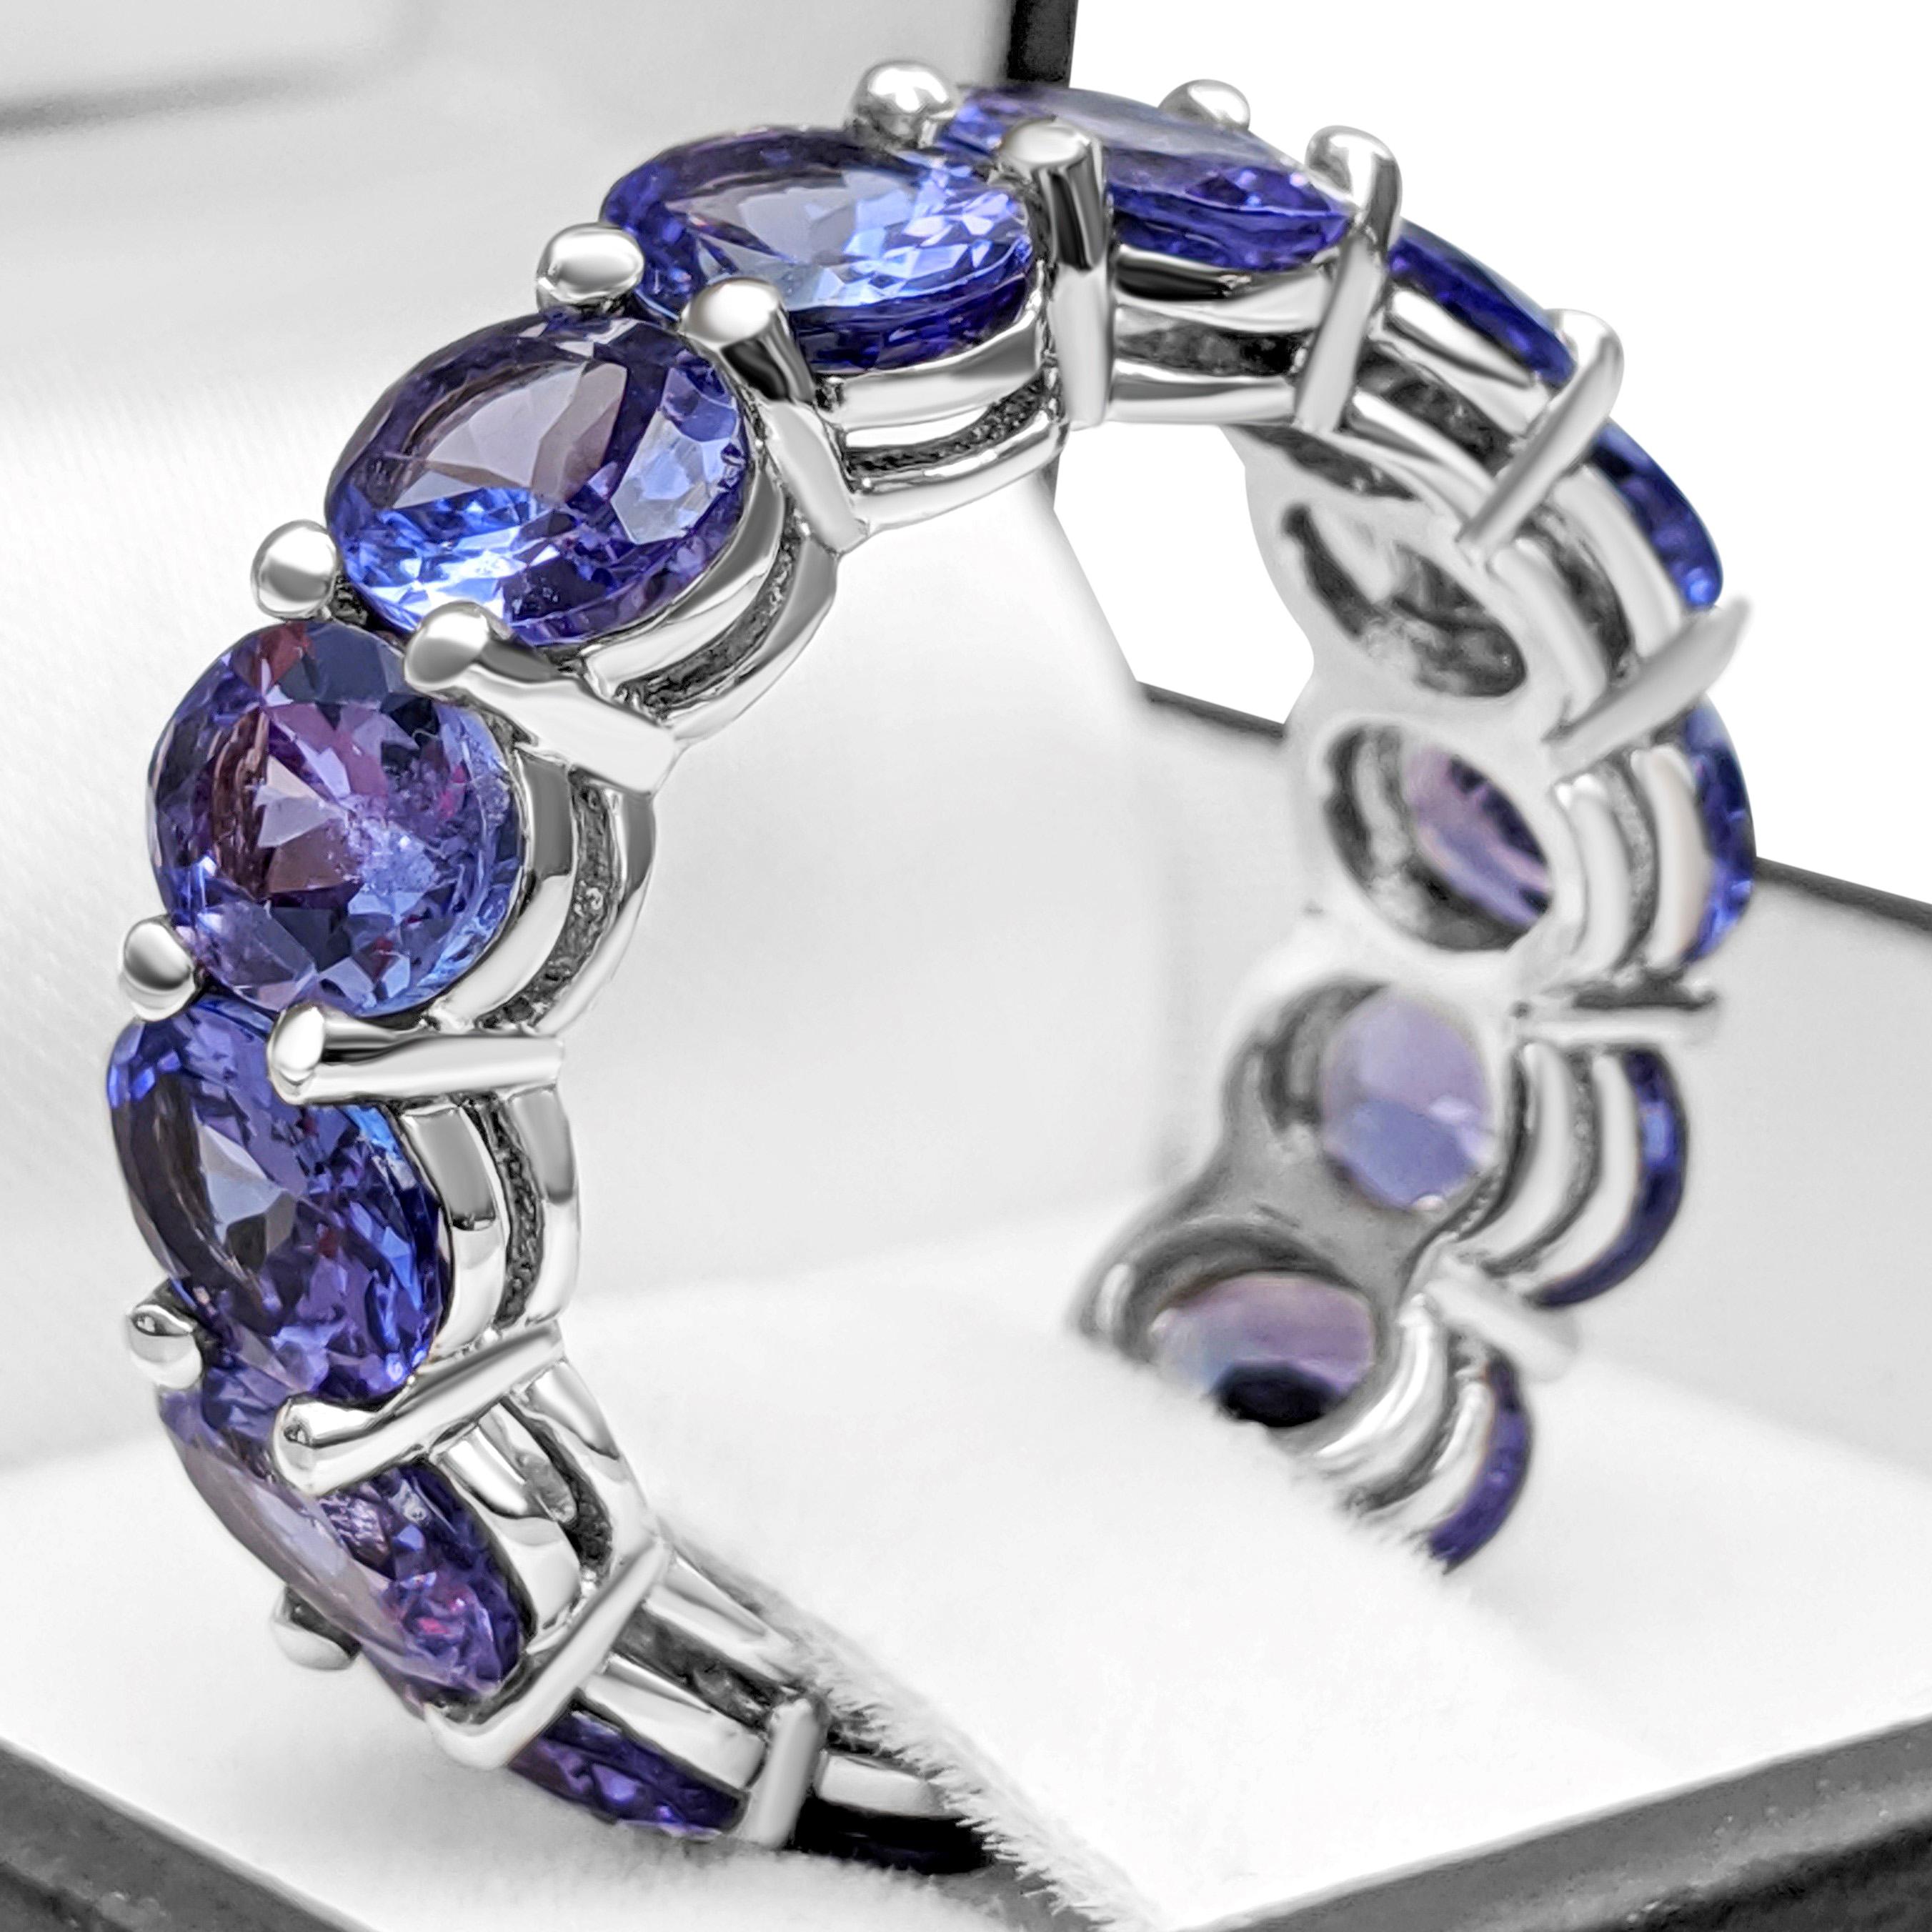 Oval Cut $1 NO RESERVE! -  10.43cttw Tanzanite Eternity Band - 14K White Gold Ring